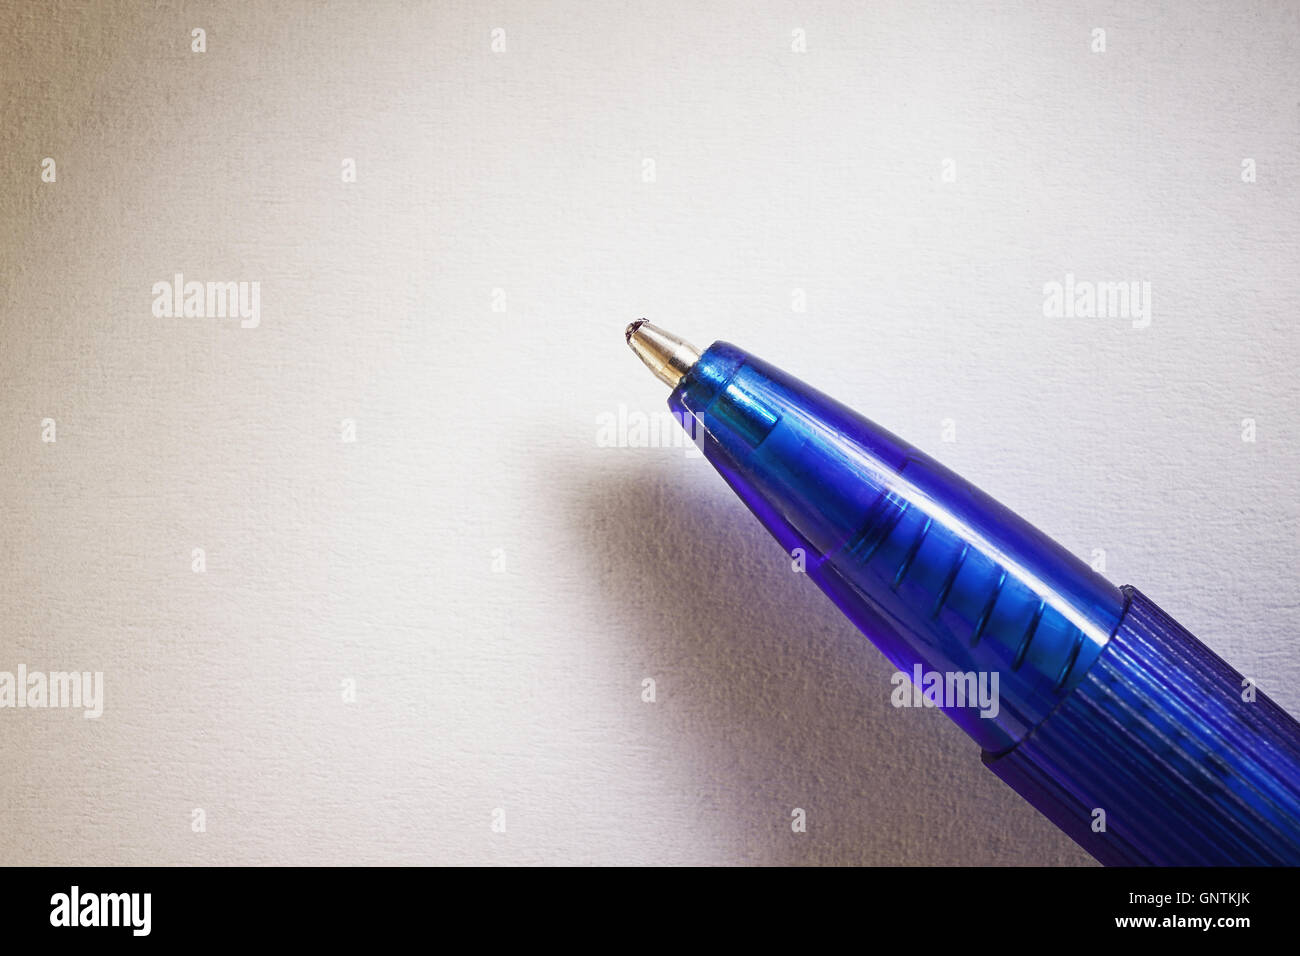 Closeup view of a blue ball pen on white paper. Stock Photo